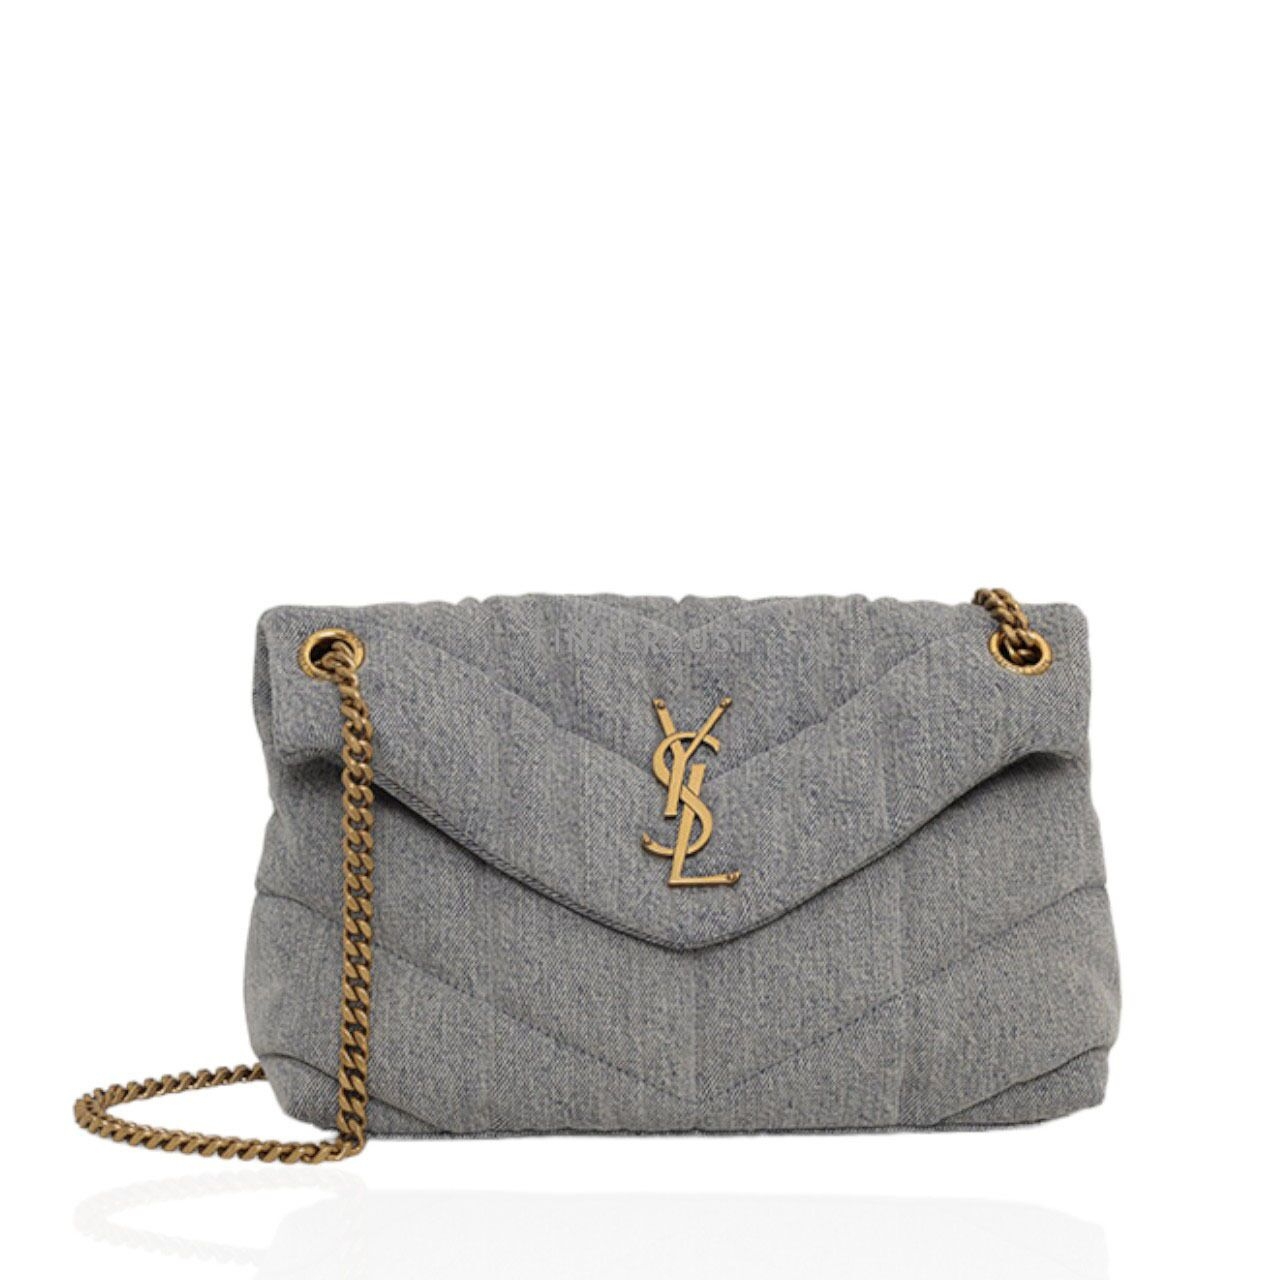 Saint Laurent Small Loulou Puffer in Blue Gray/Light Azure Denim x Smooth Leather Shoulder Bag